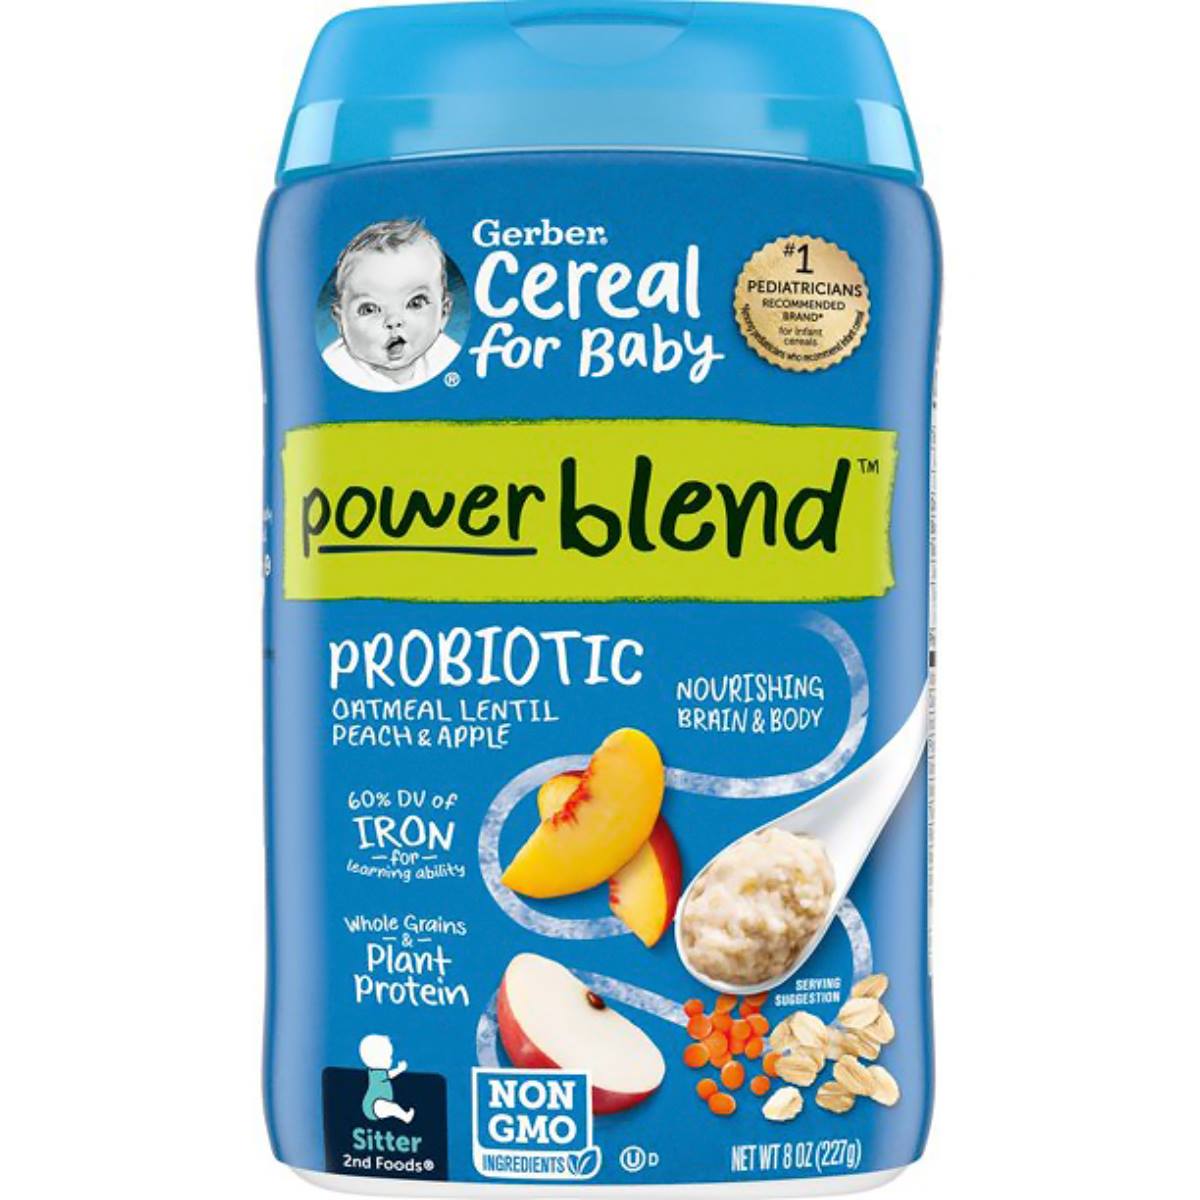 Gerber Cereal for Baby, Powerblend, Probiotic Oatmeal Lentil, Peach & Apple - 227g (8oz)